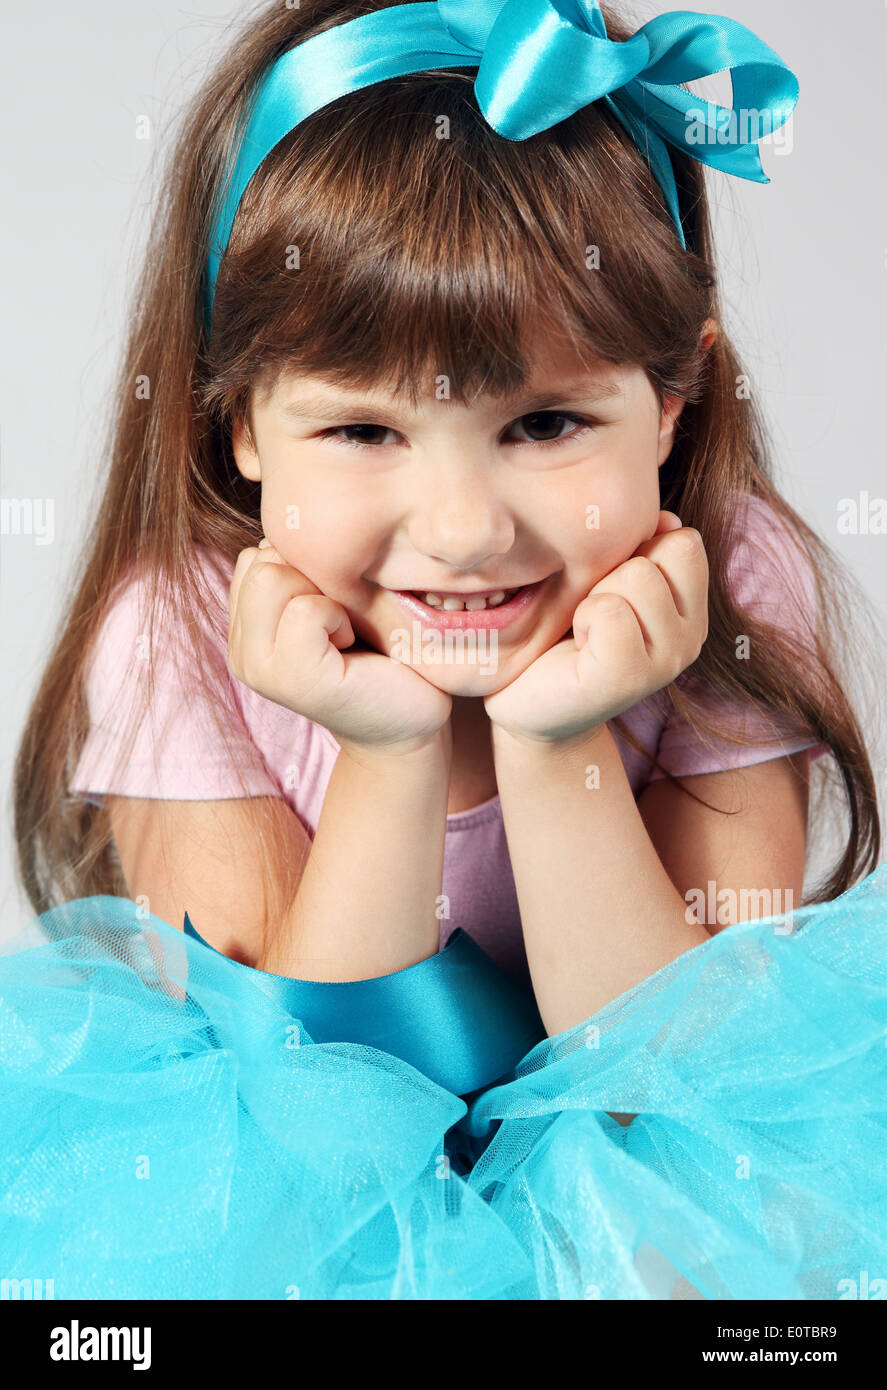 Little Smiling Girl Sitting Hands Proping Up Chin Stock Photo